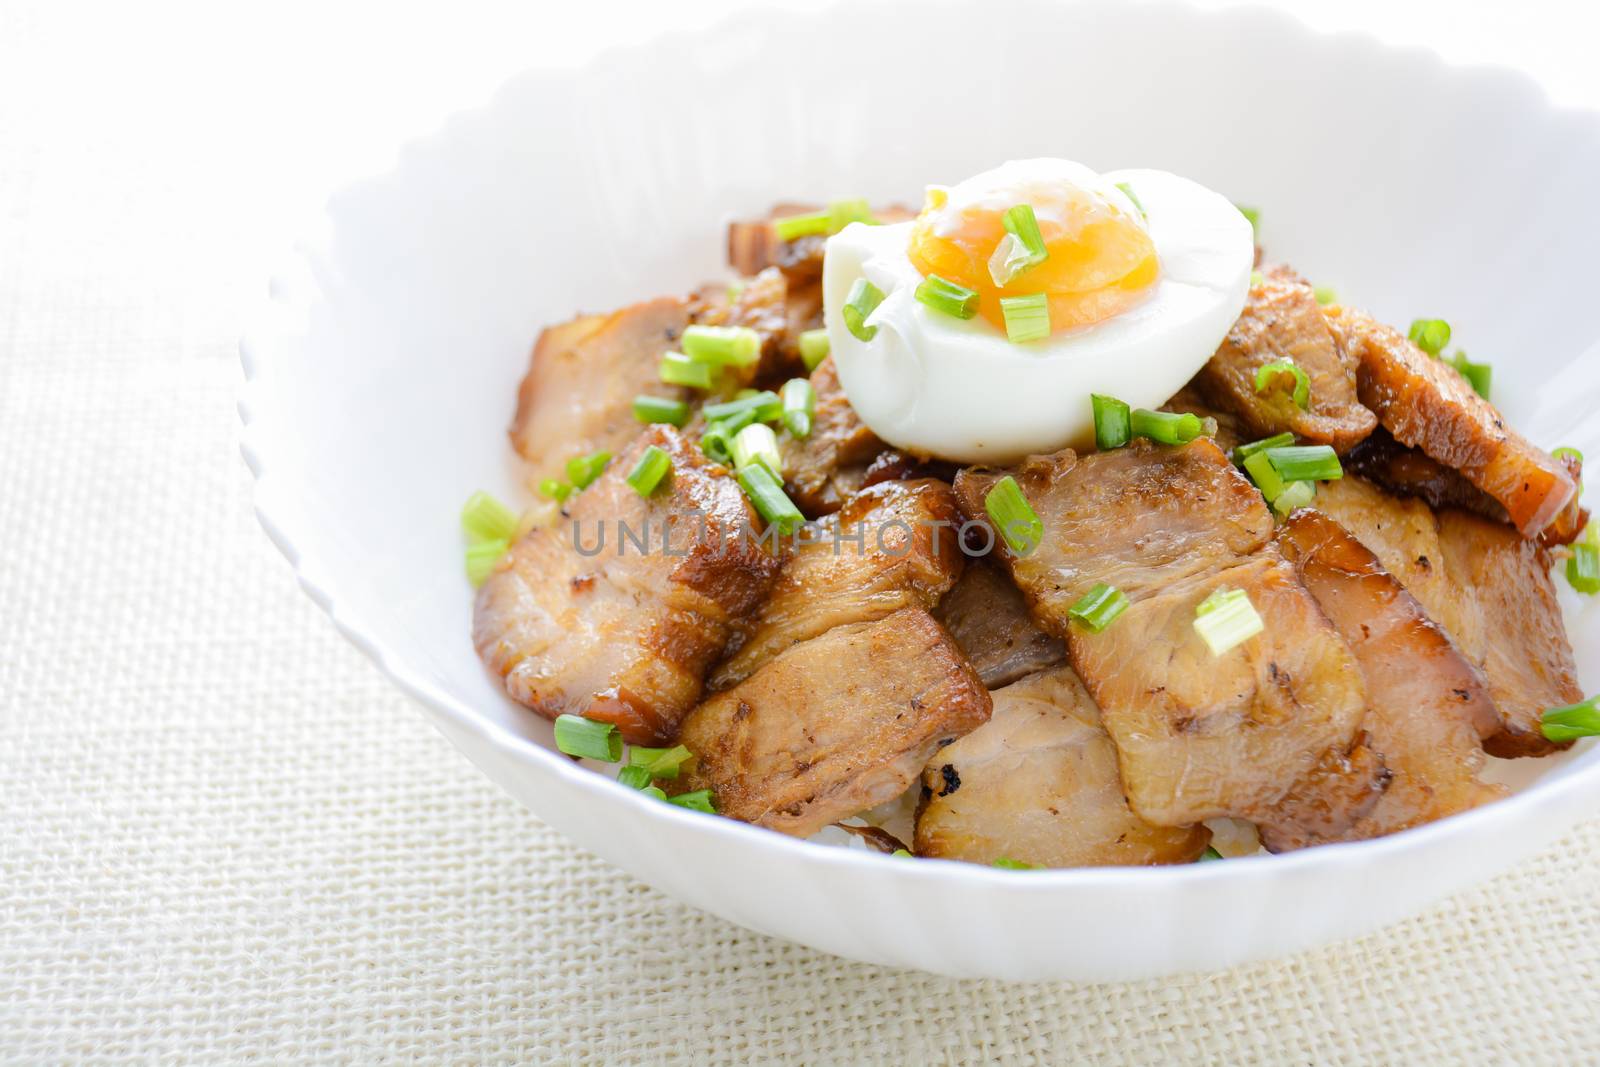 Bowl of rice topped with Braised pork belly and boiled egg, Japa by yuiyuize